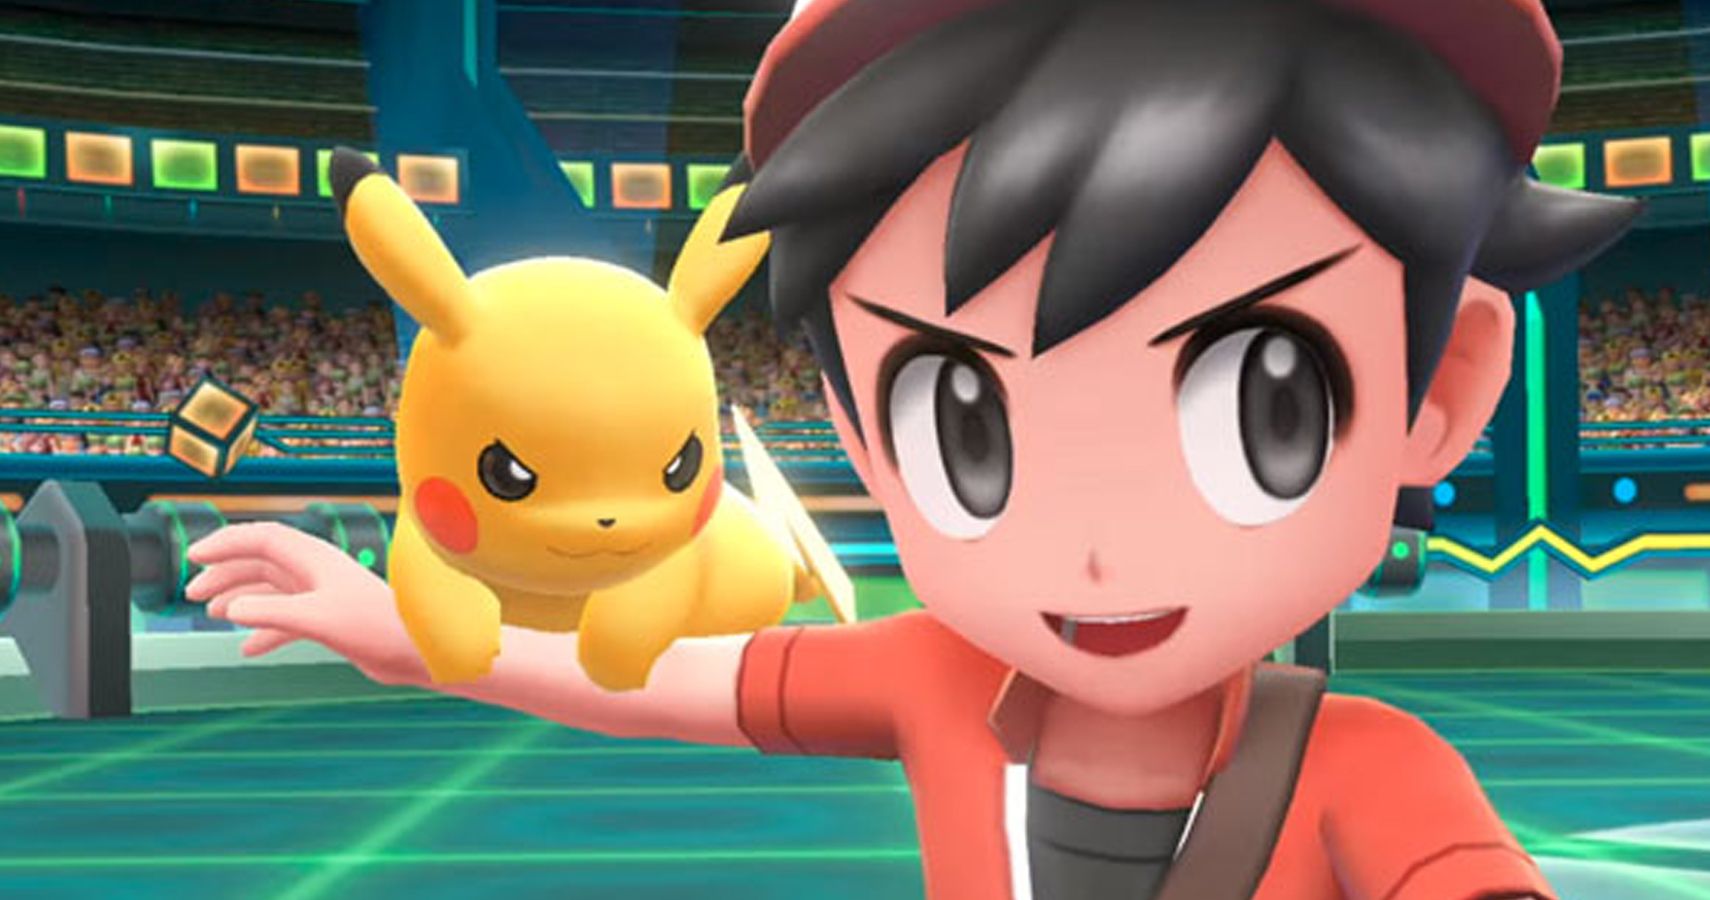 Detailed Map Of Kanto Revealed In Latest Lets Go Pikachu Trailer Hints At Starter Pokémon Locations